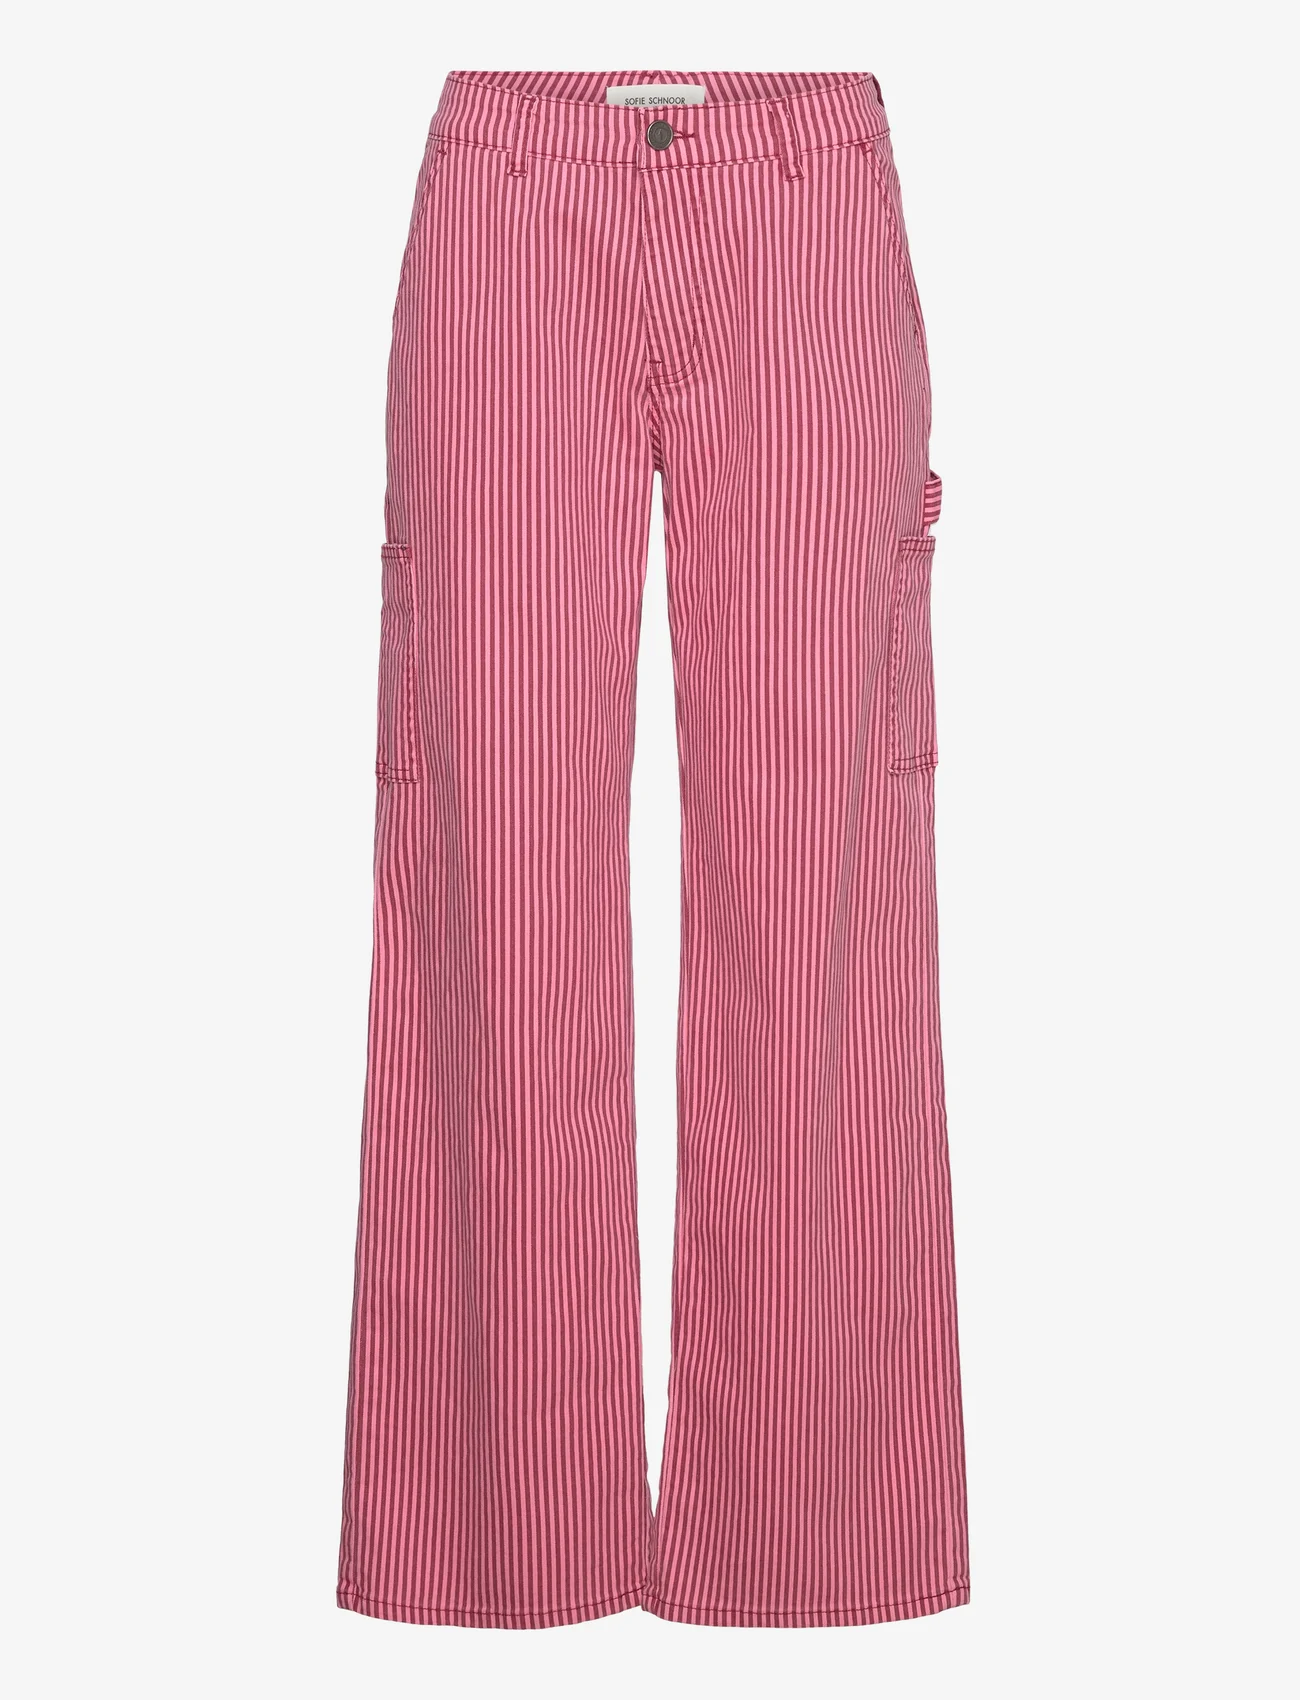 Sofie Schnoor - Trousers - pantalon cargo - red striped - 0